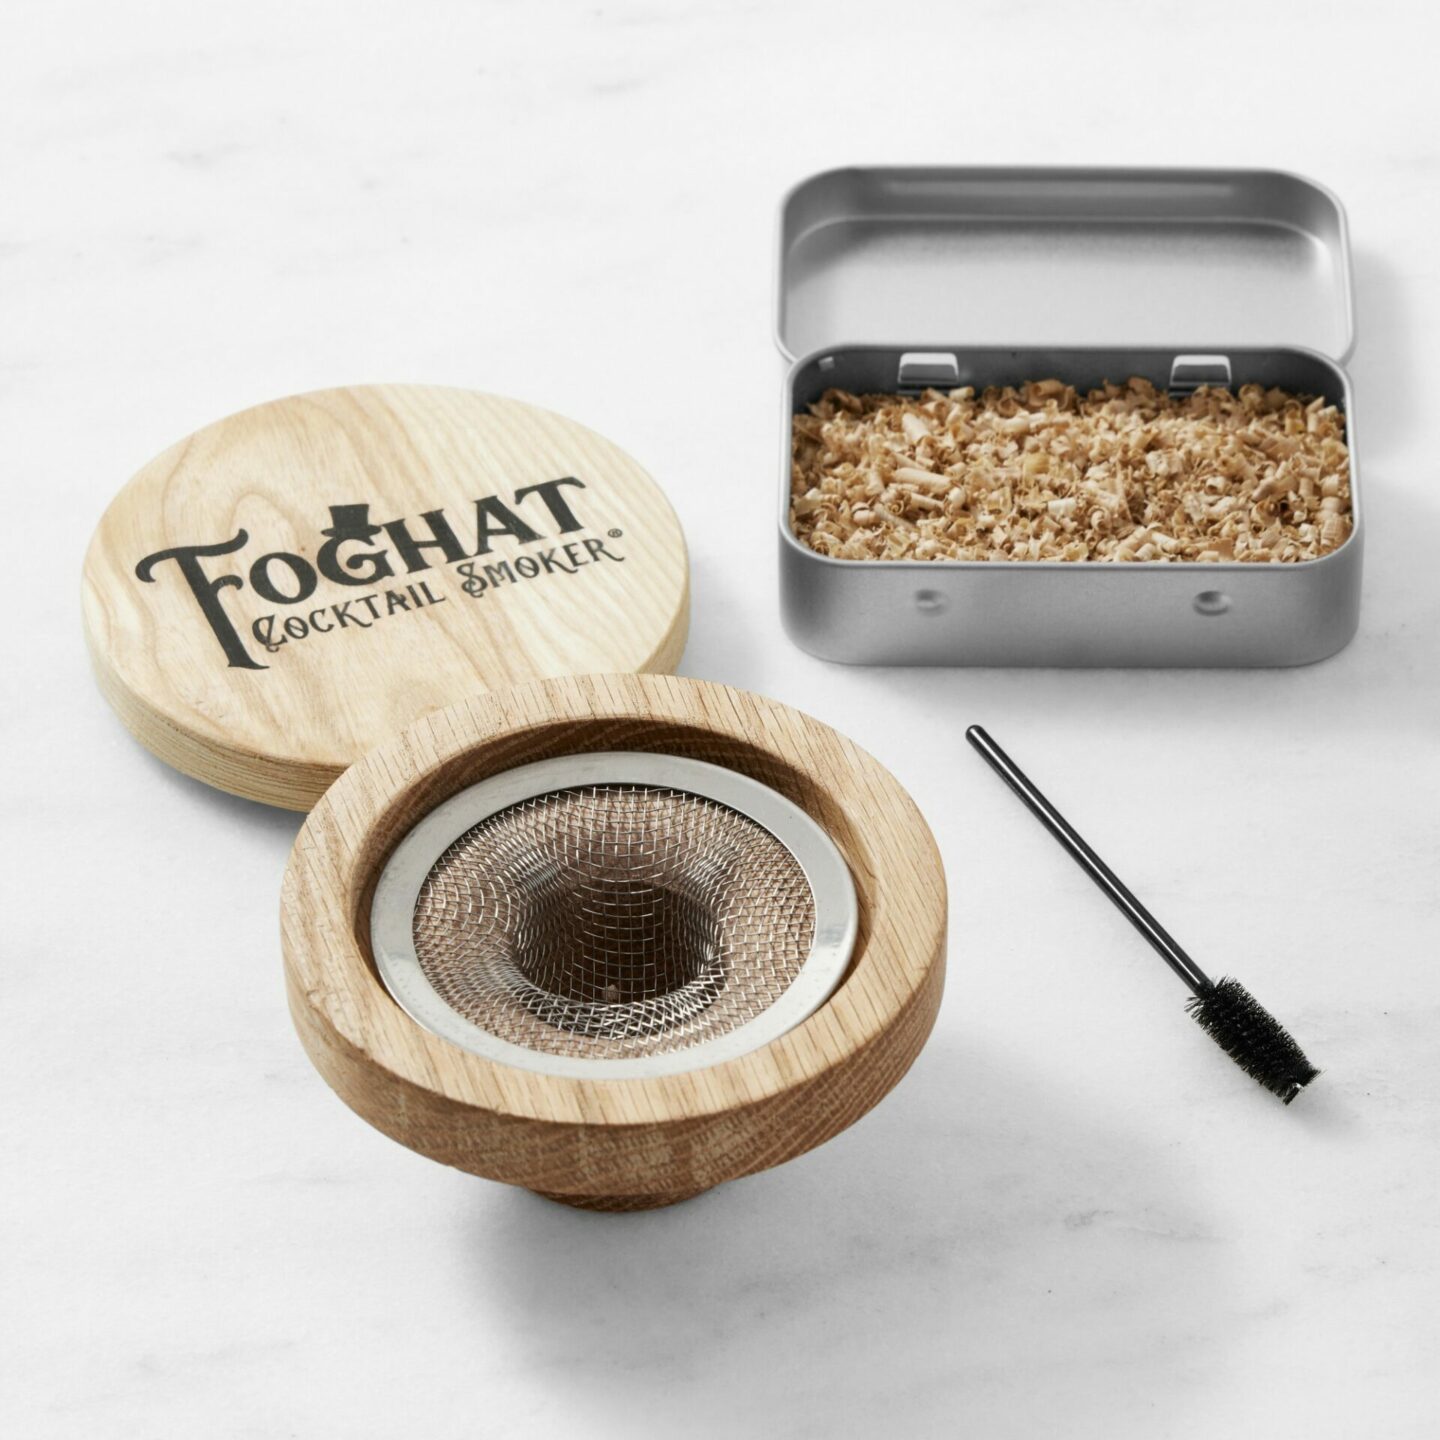 Small Foghat Cocktail Smoker Kit with cover and wood chips